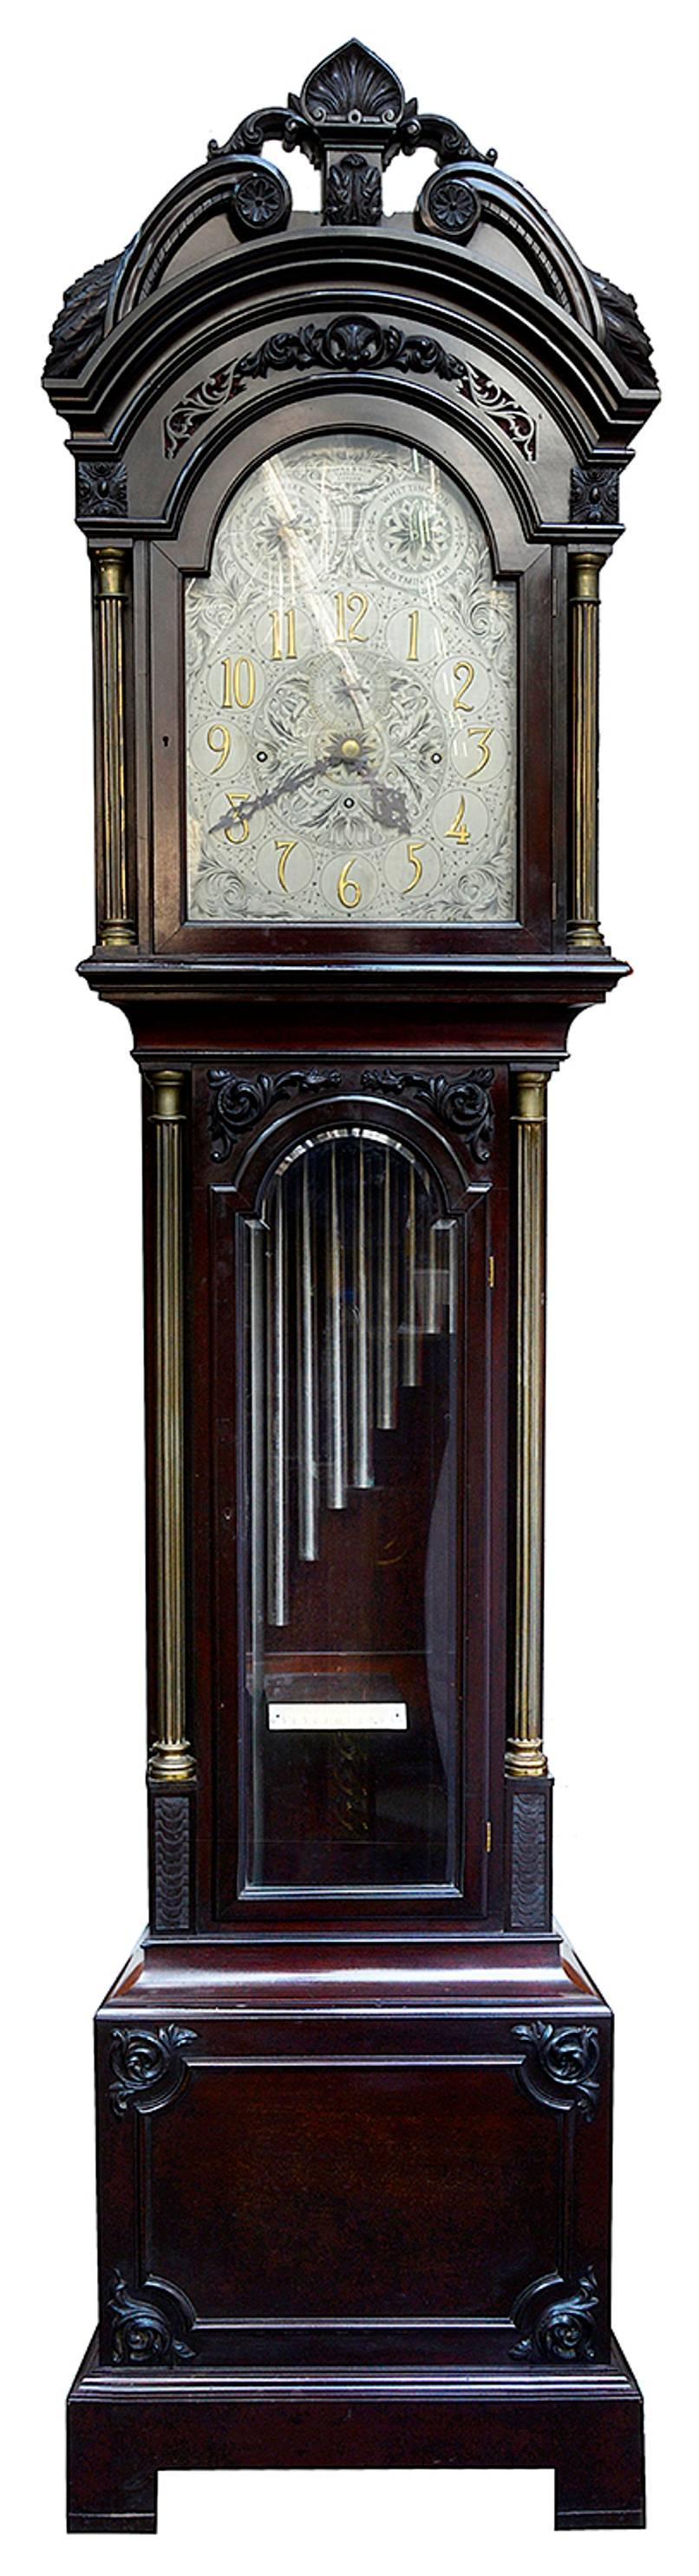 A very good quality early 20th century Chippendale revival mahogany musical longcase clock.
Makers name; Donne and Son, Cornhill, London
The eight day striking movement with Whittington and Westminster chimes on tubes. Silvered arch dial with